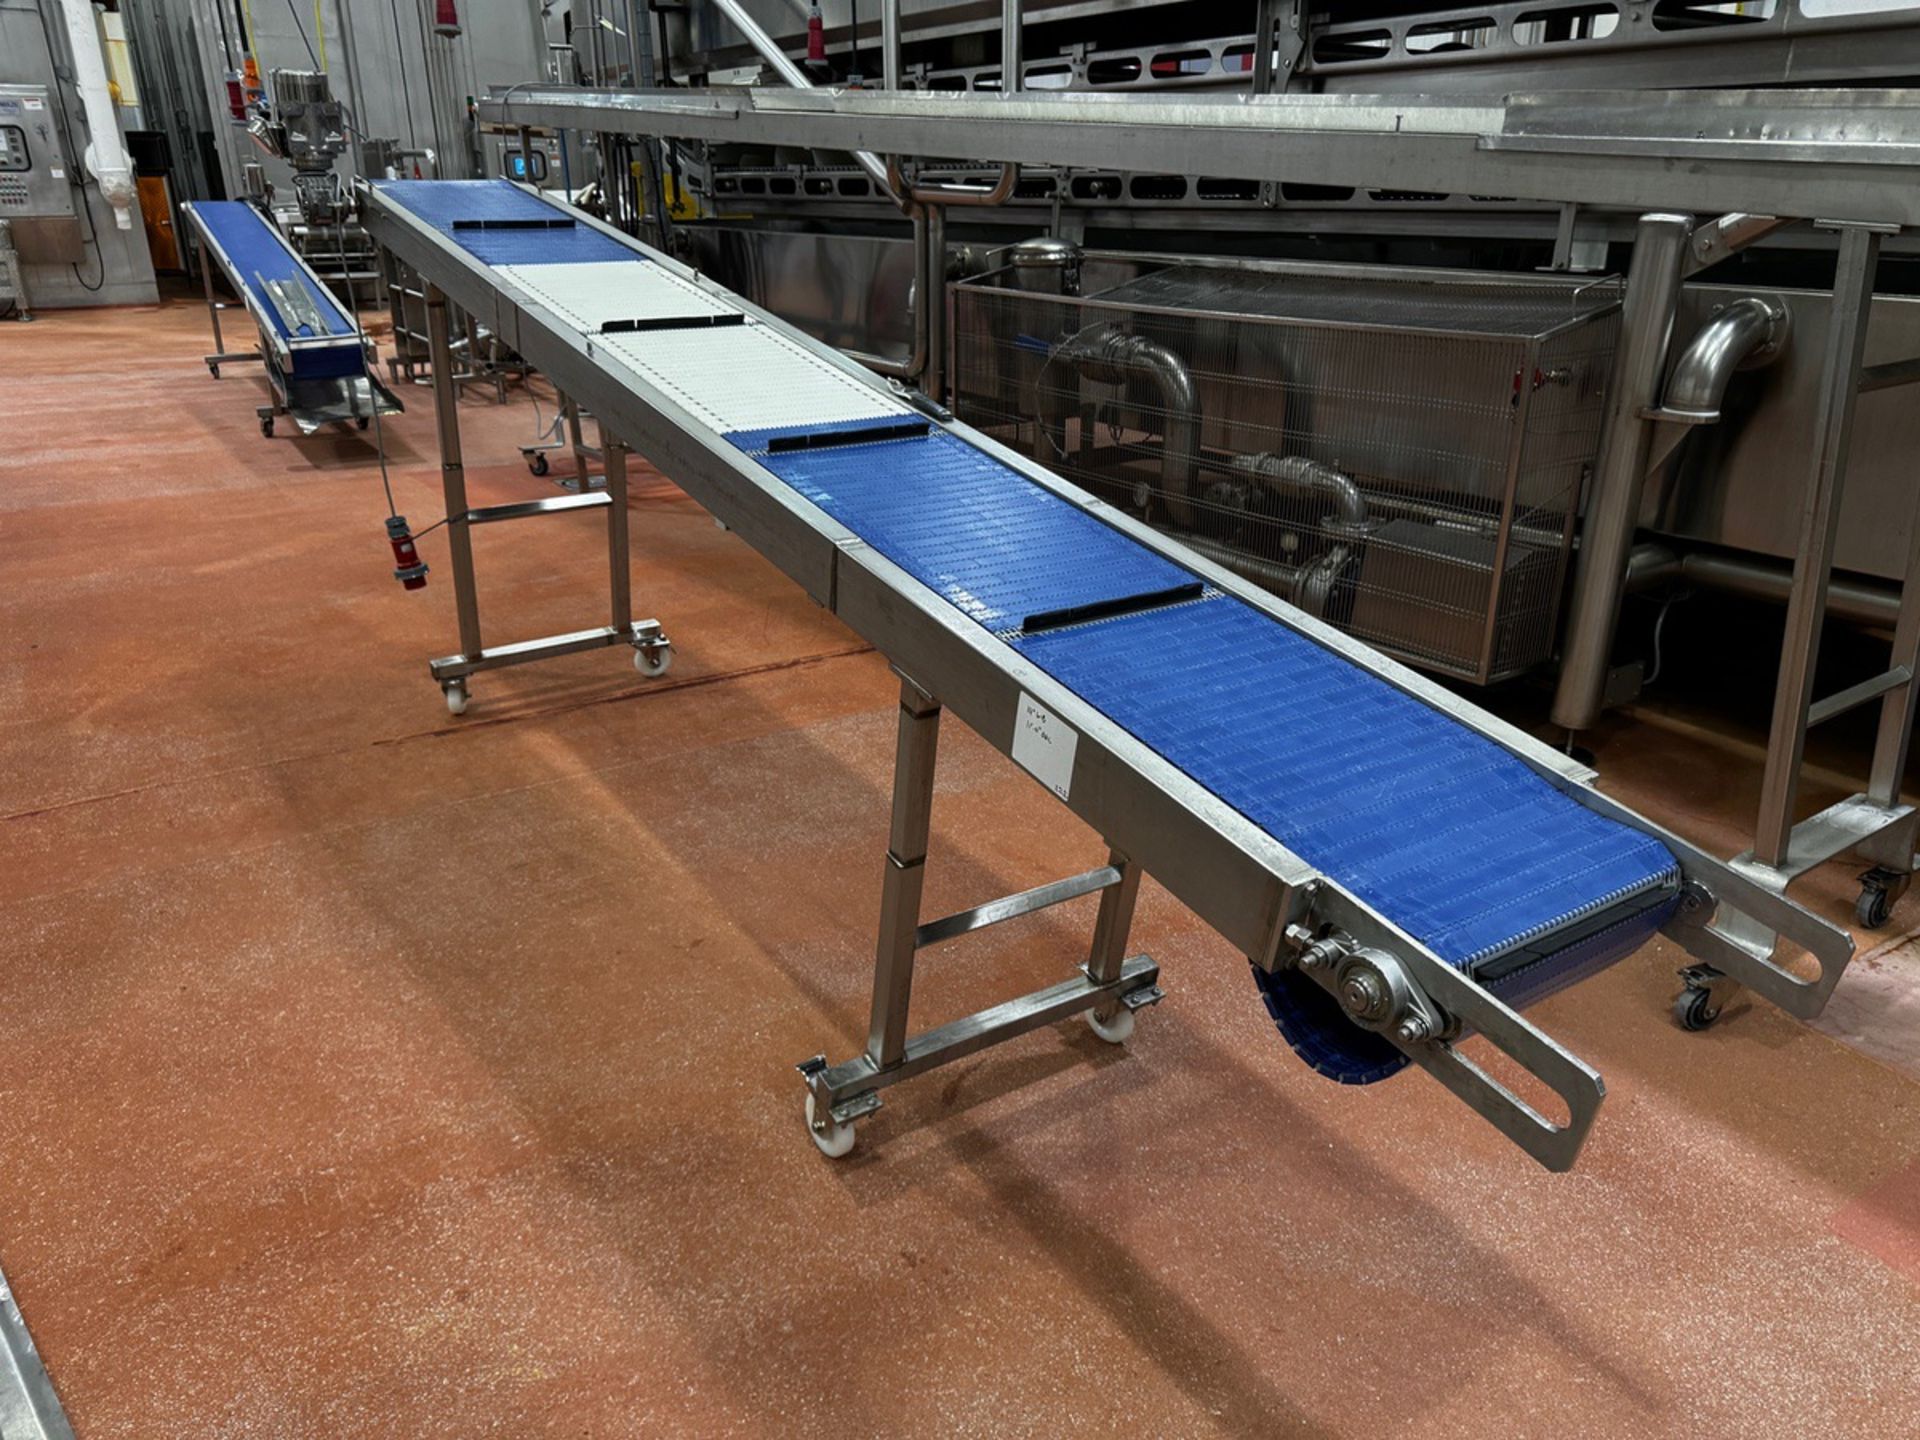 Stainless Steel Frame Incline Conveyor, 14" W x 11' OA Length, Mounted on Casters